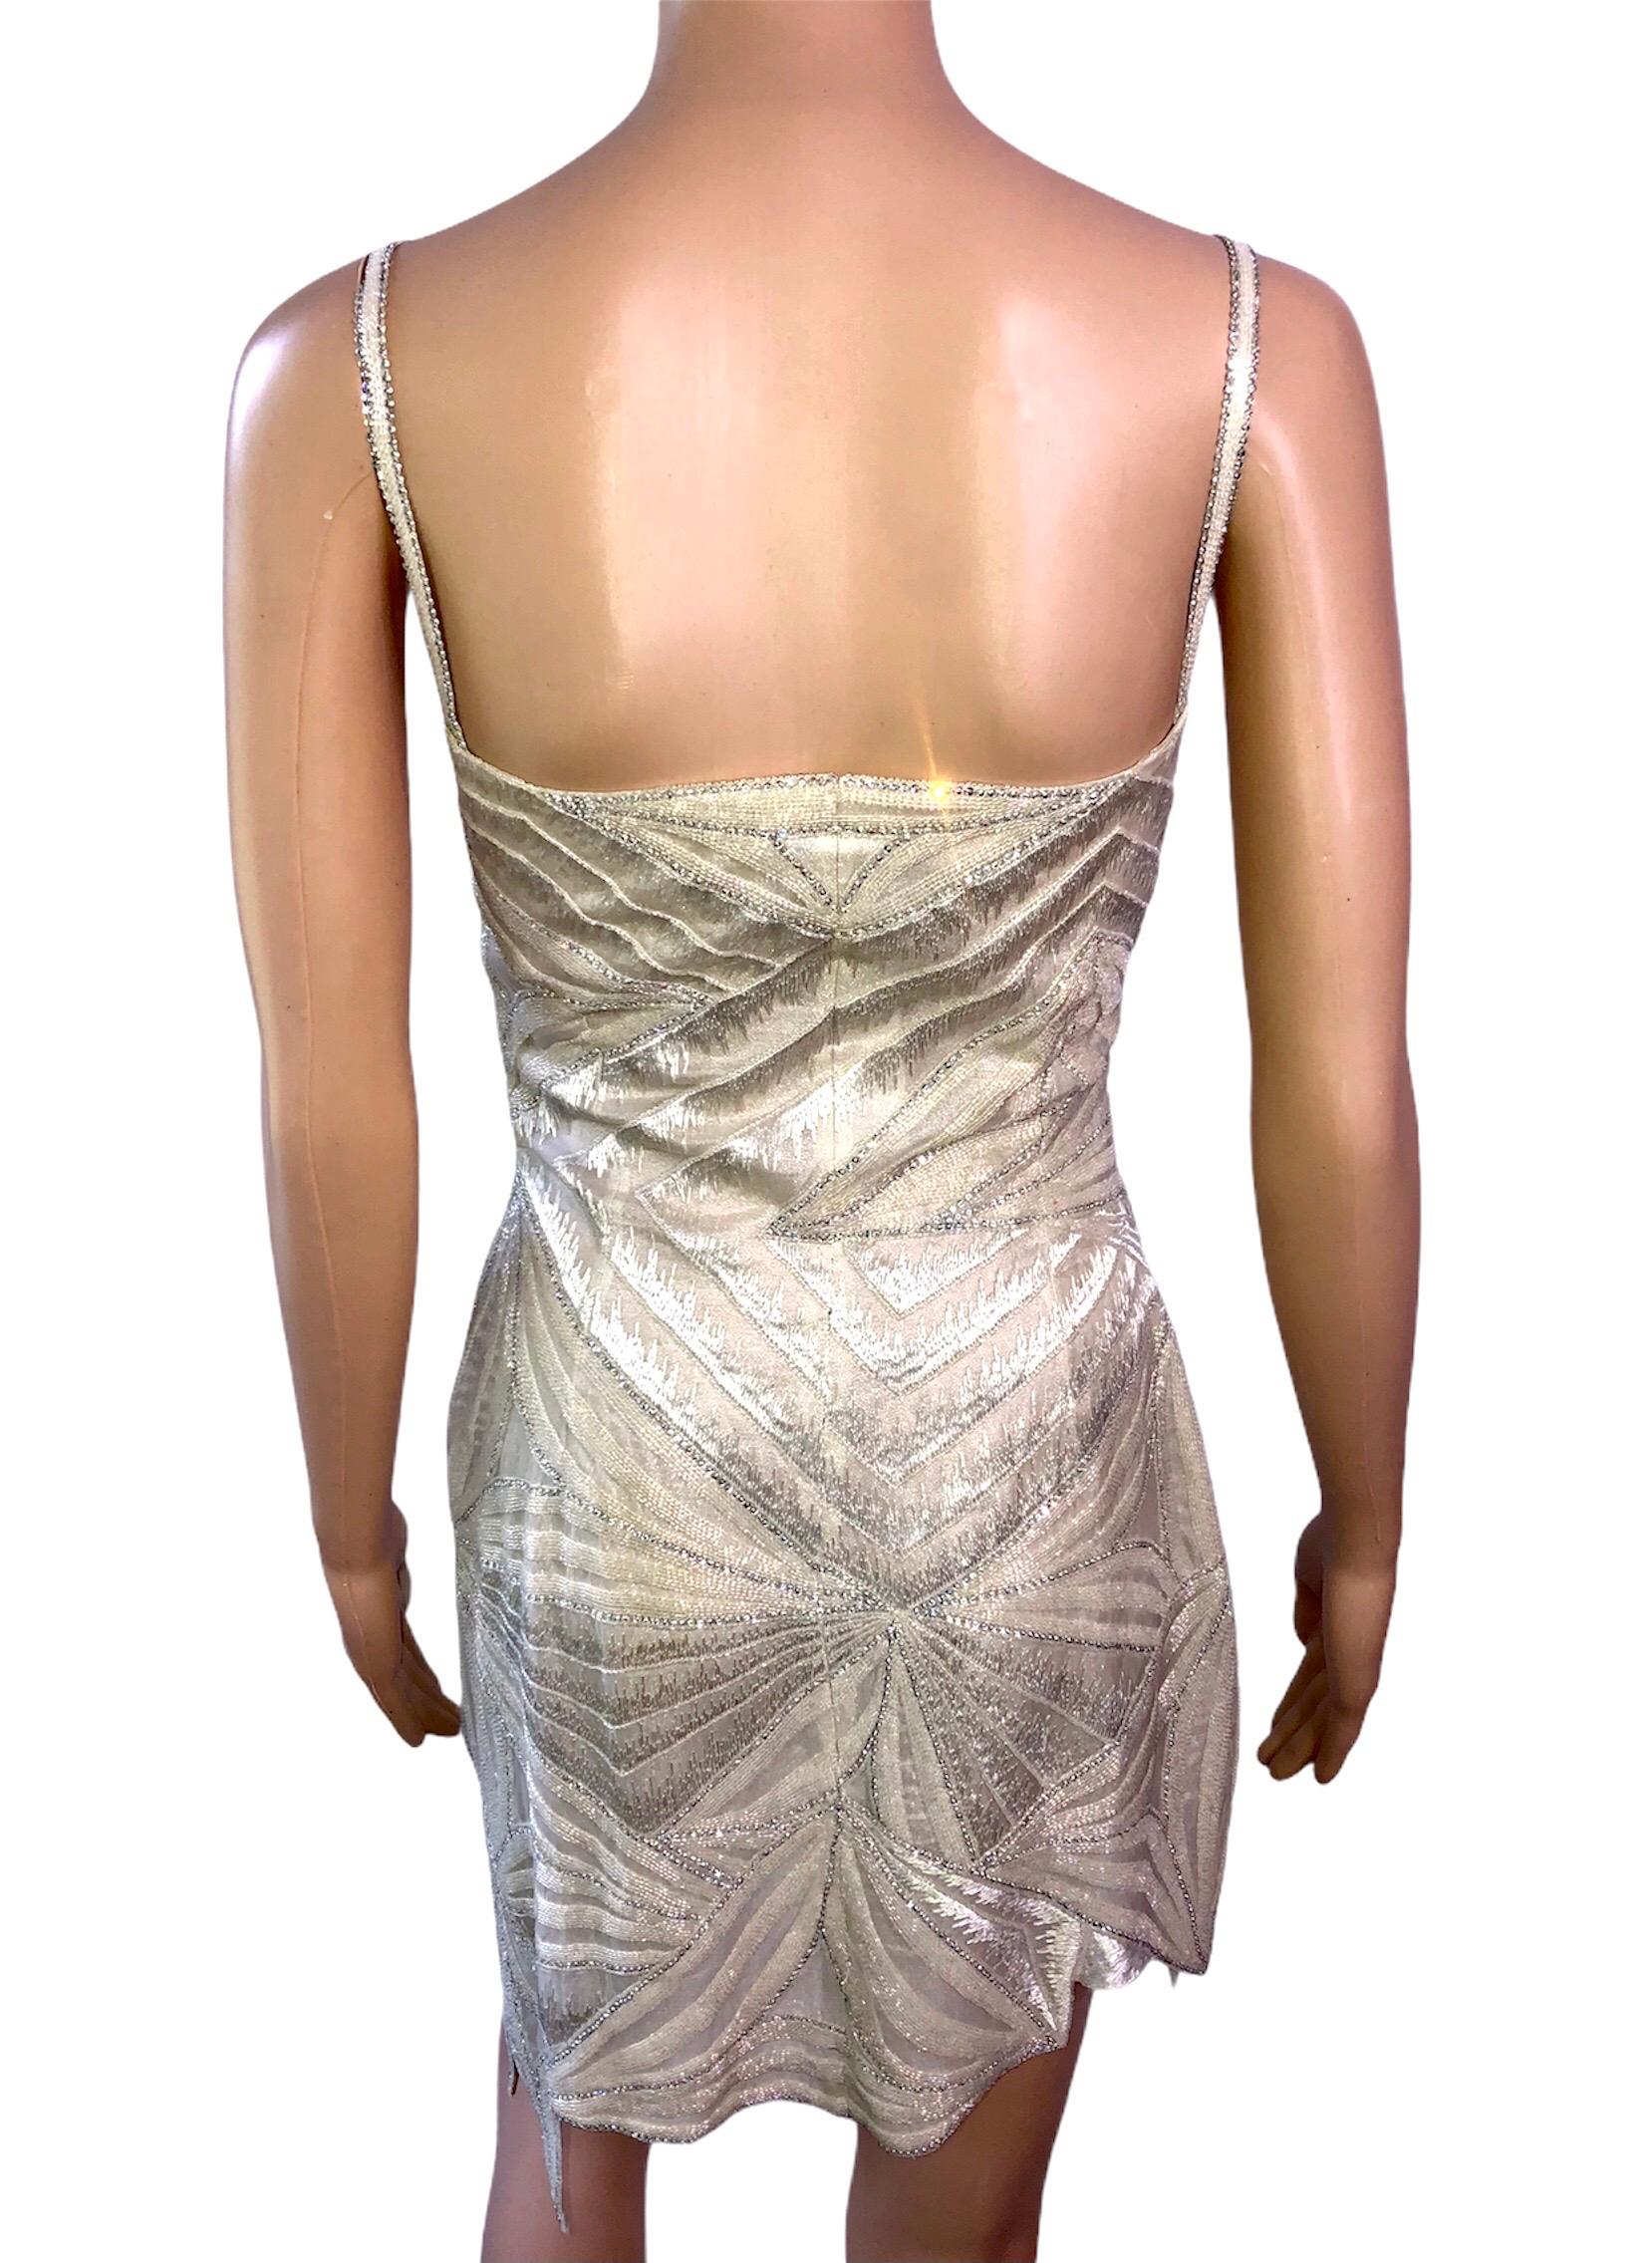 Women's Atelier Versace Haute Couture F/W 1998 Embellished Sheer Cutout Mini Dress For Sale